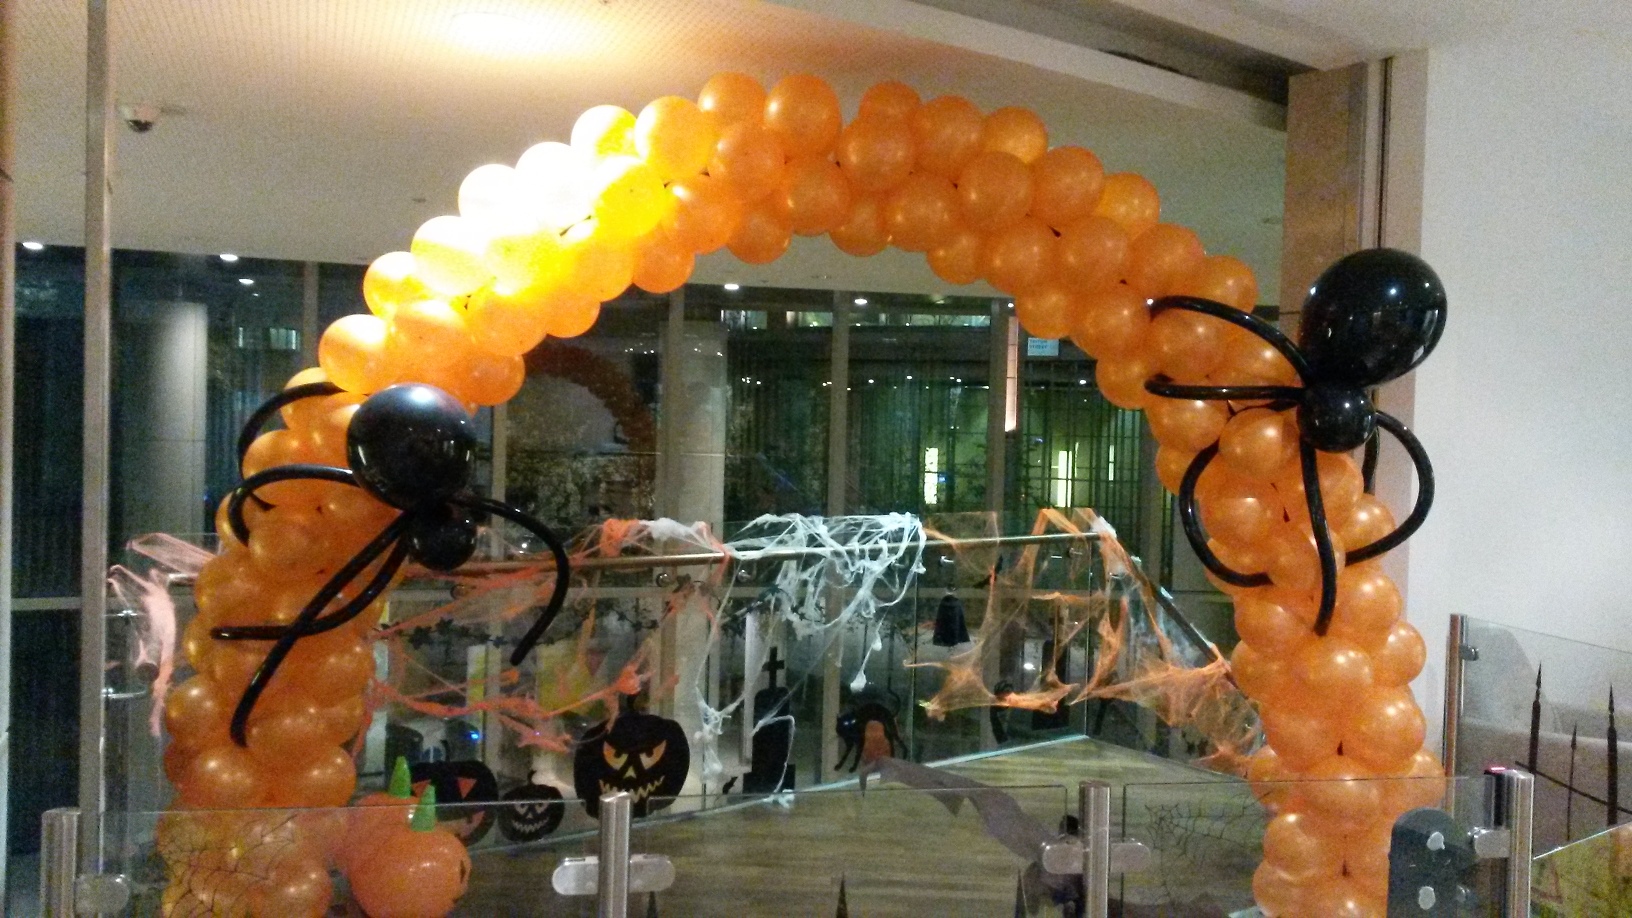 Orange Spiral Balloon Arch with Spider Balloons created for a Halloween Party